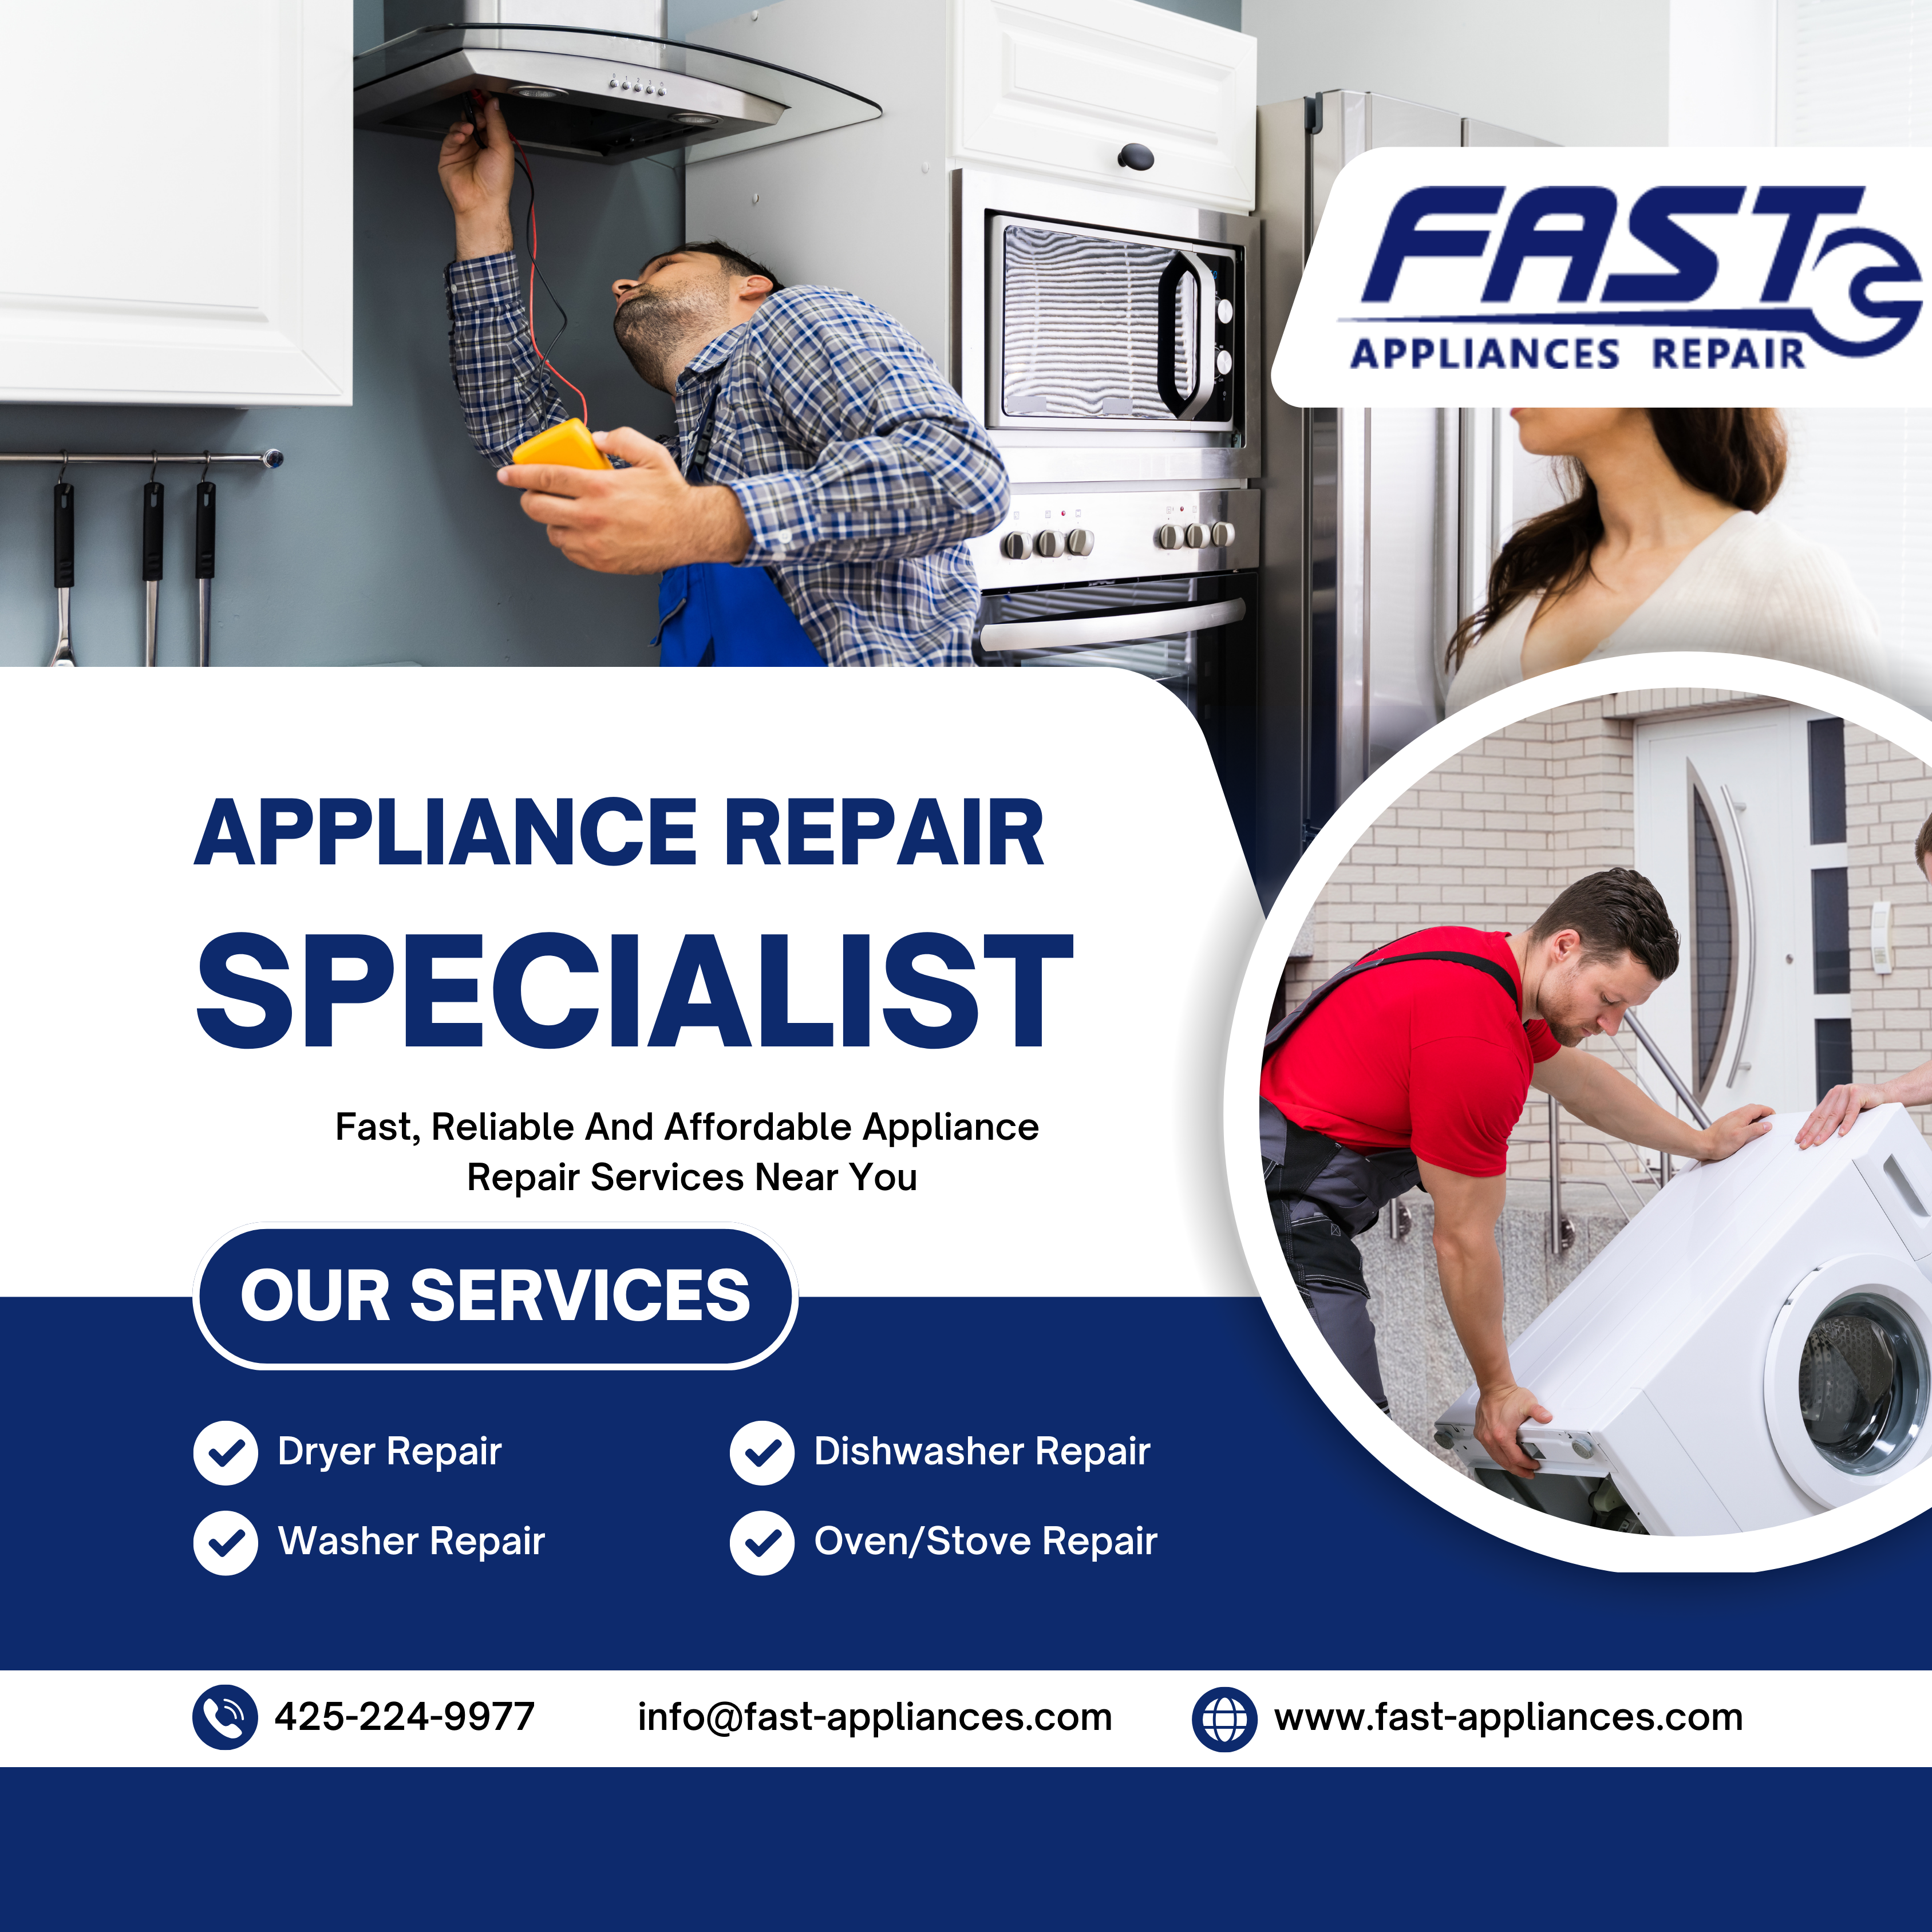 Appliance Repair Services Nearby Edmonds, WA, USA by Fast Appliances Repair